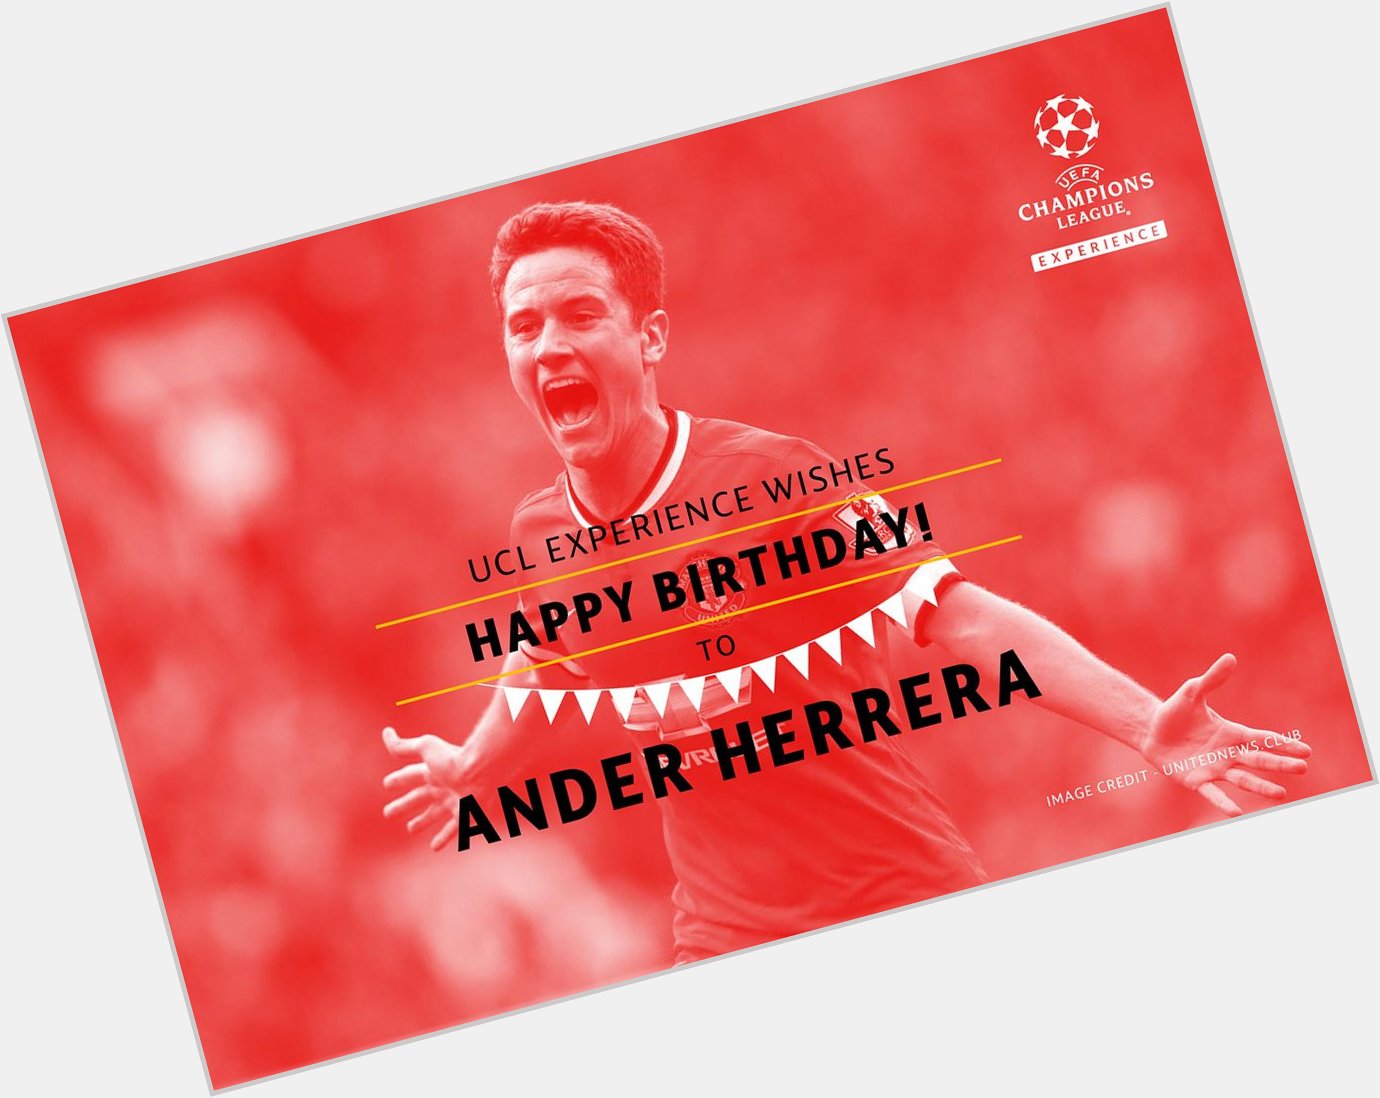 Happy Birthday Ander Herrera! Will Herrera Make his first UCL appearance for the Red Devils n Tuesday? 